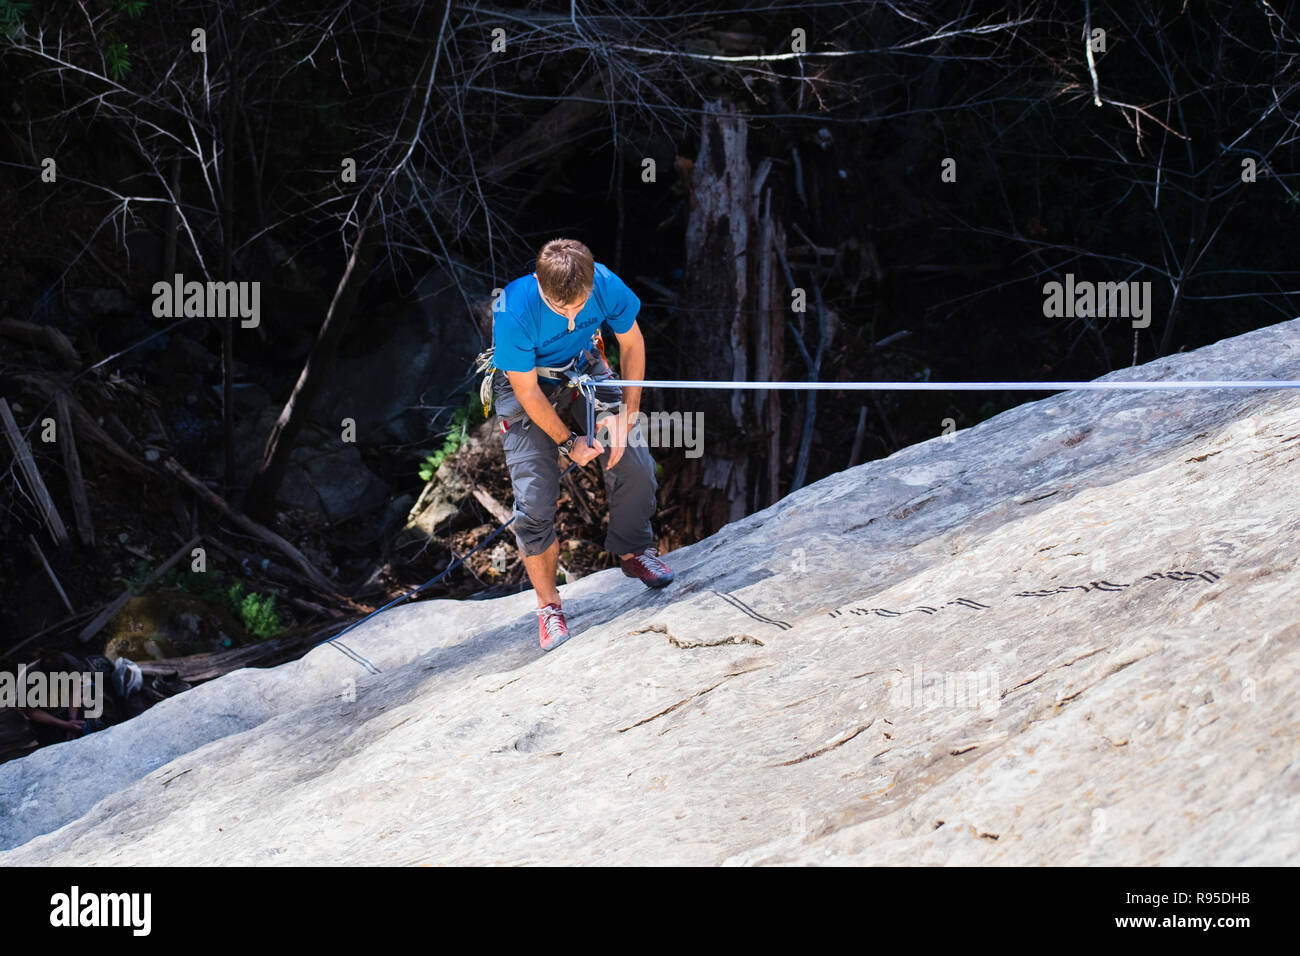 February 11, 2018 Los Gatos / CA / USA - Climber rappelling after climbing a rock wall at the waterfall in Castle Rock State Park, Santa Cruz mountain Stock Photo